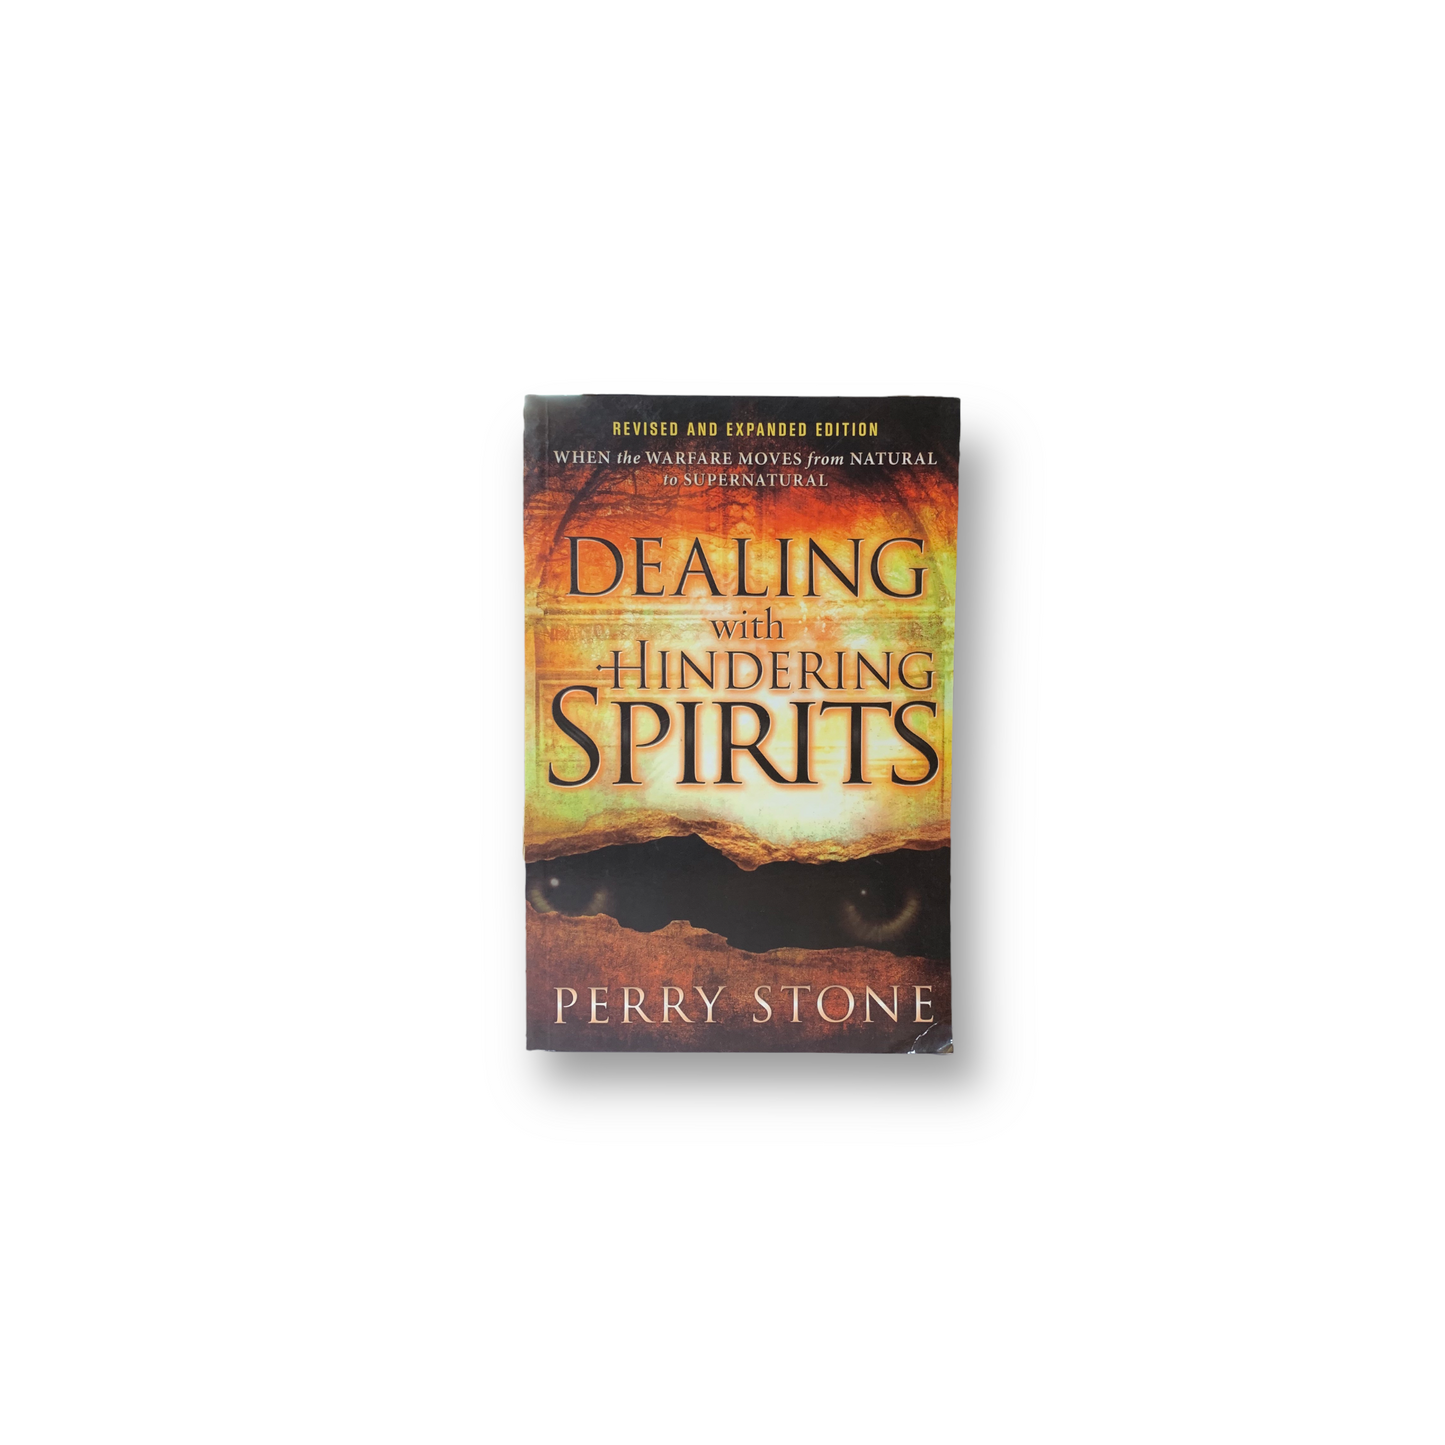 Dealing With Hindering Spirits